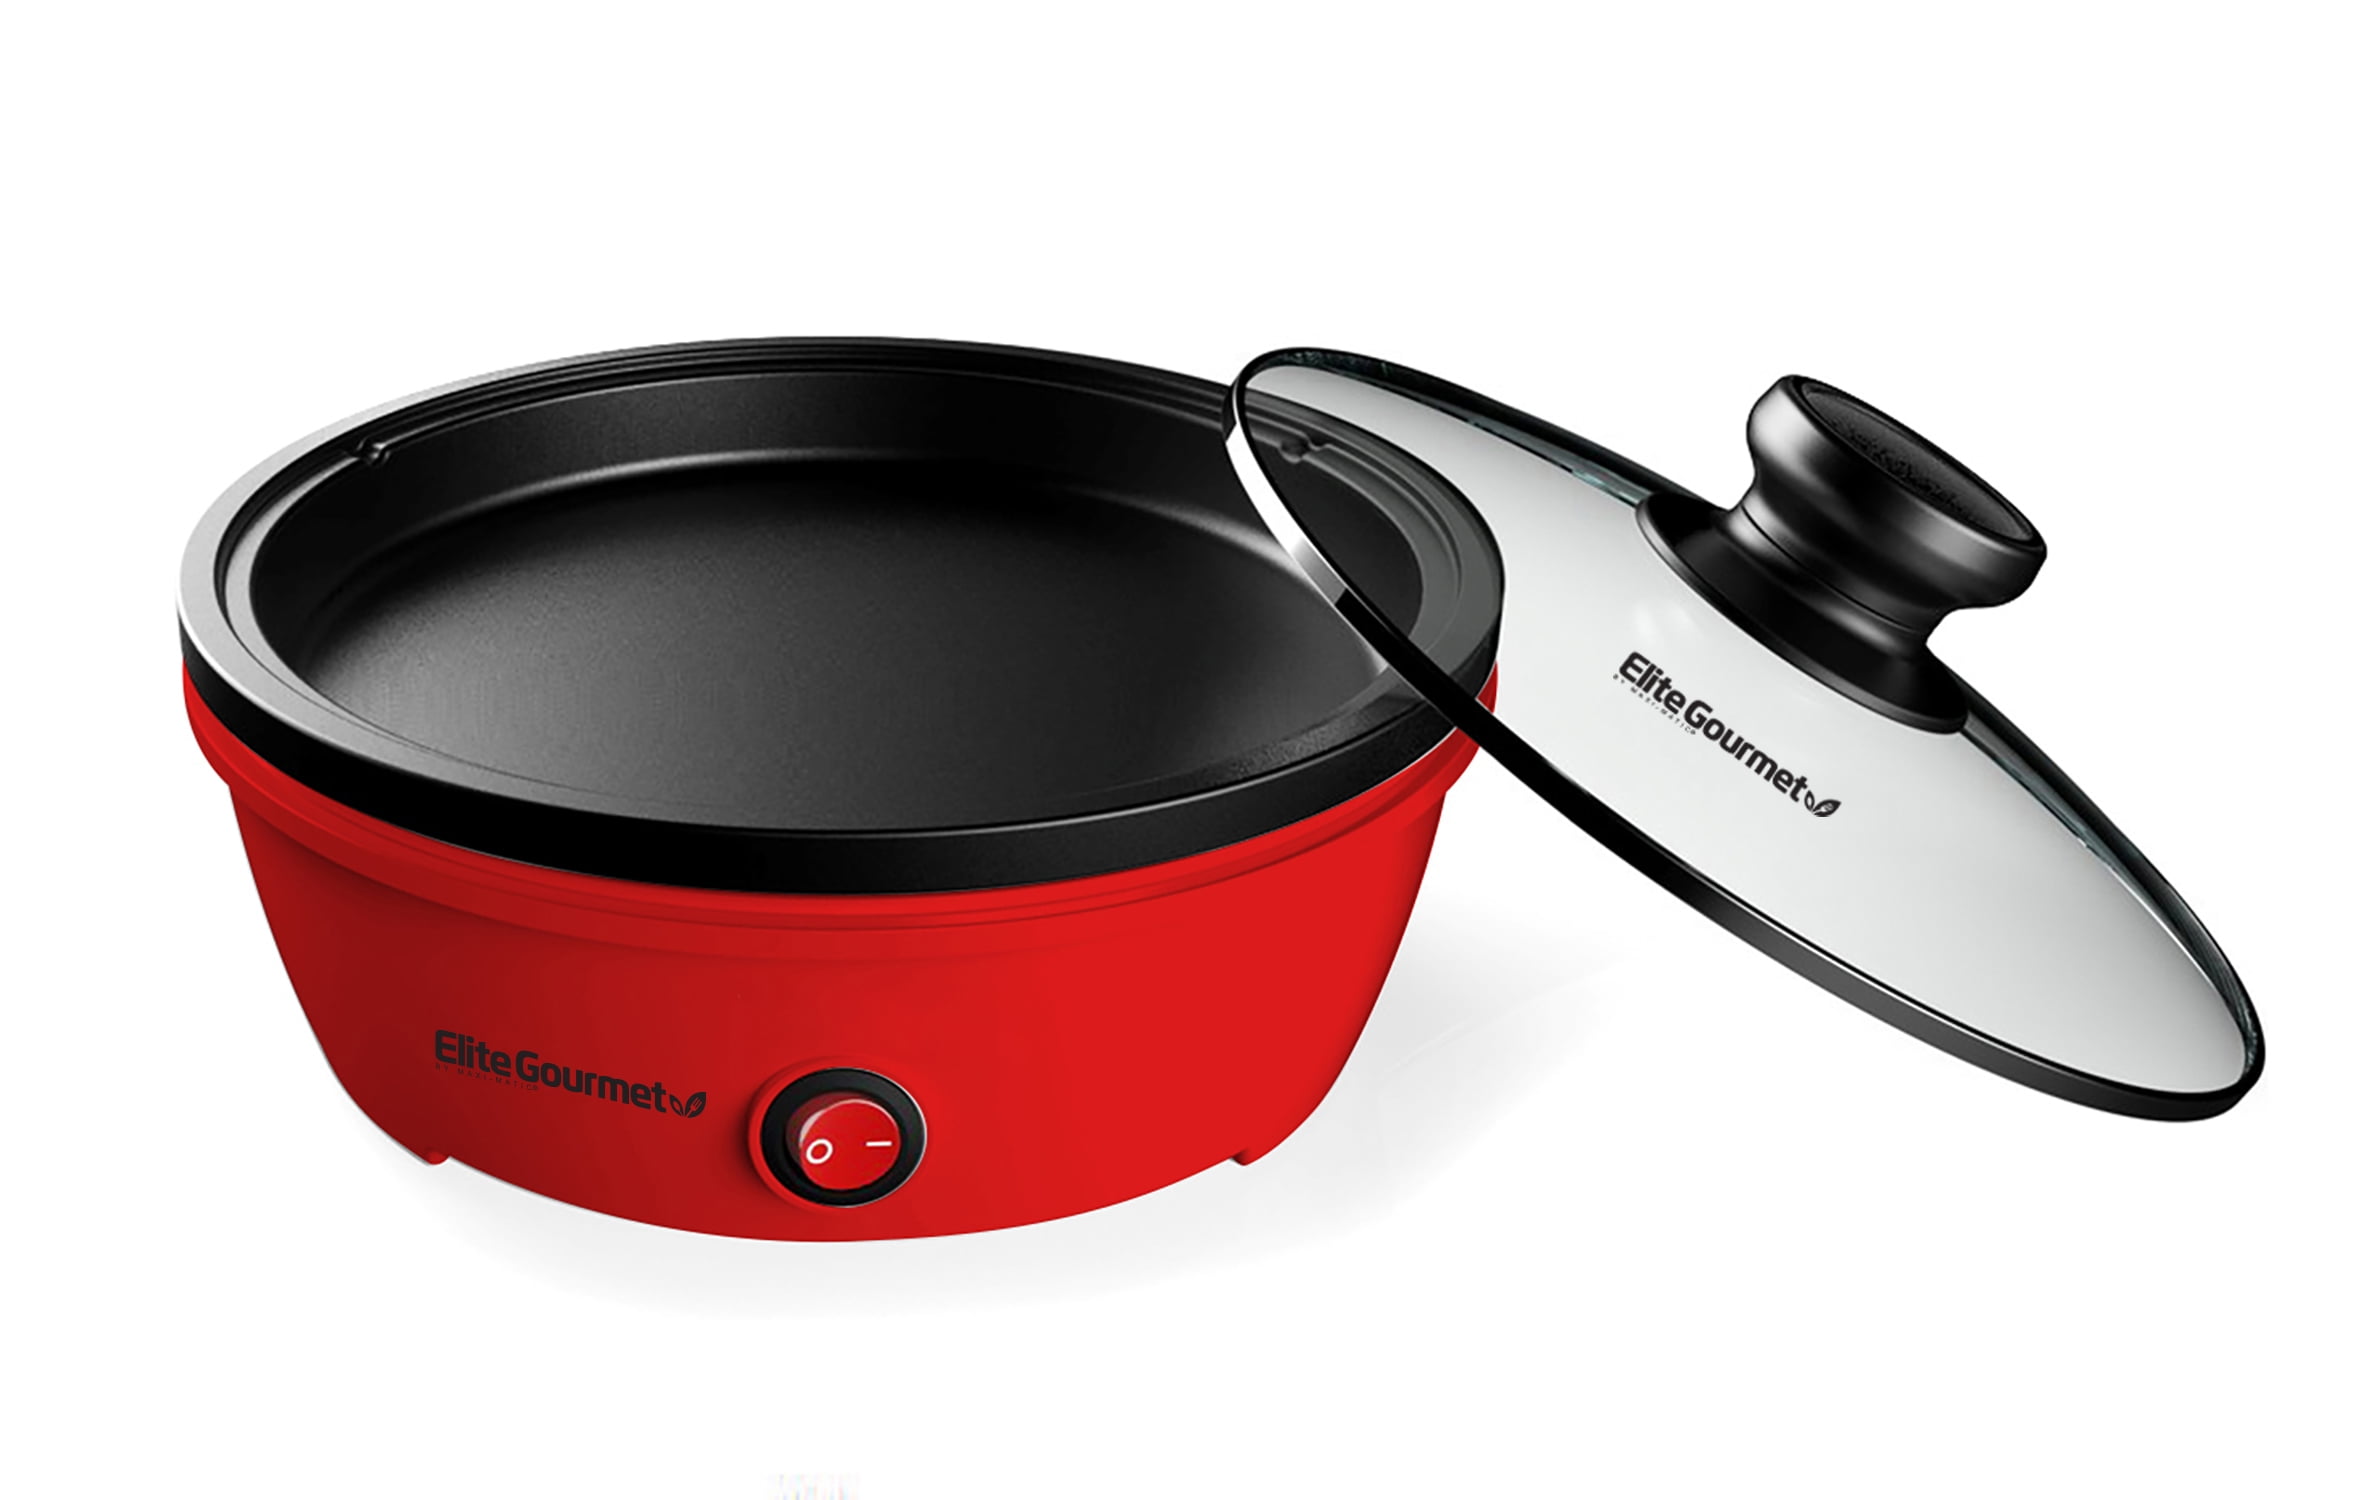 Elite Gourmet 10.5”x 2” Electric Skillet with Handle, 1 ct - King